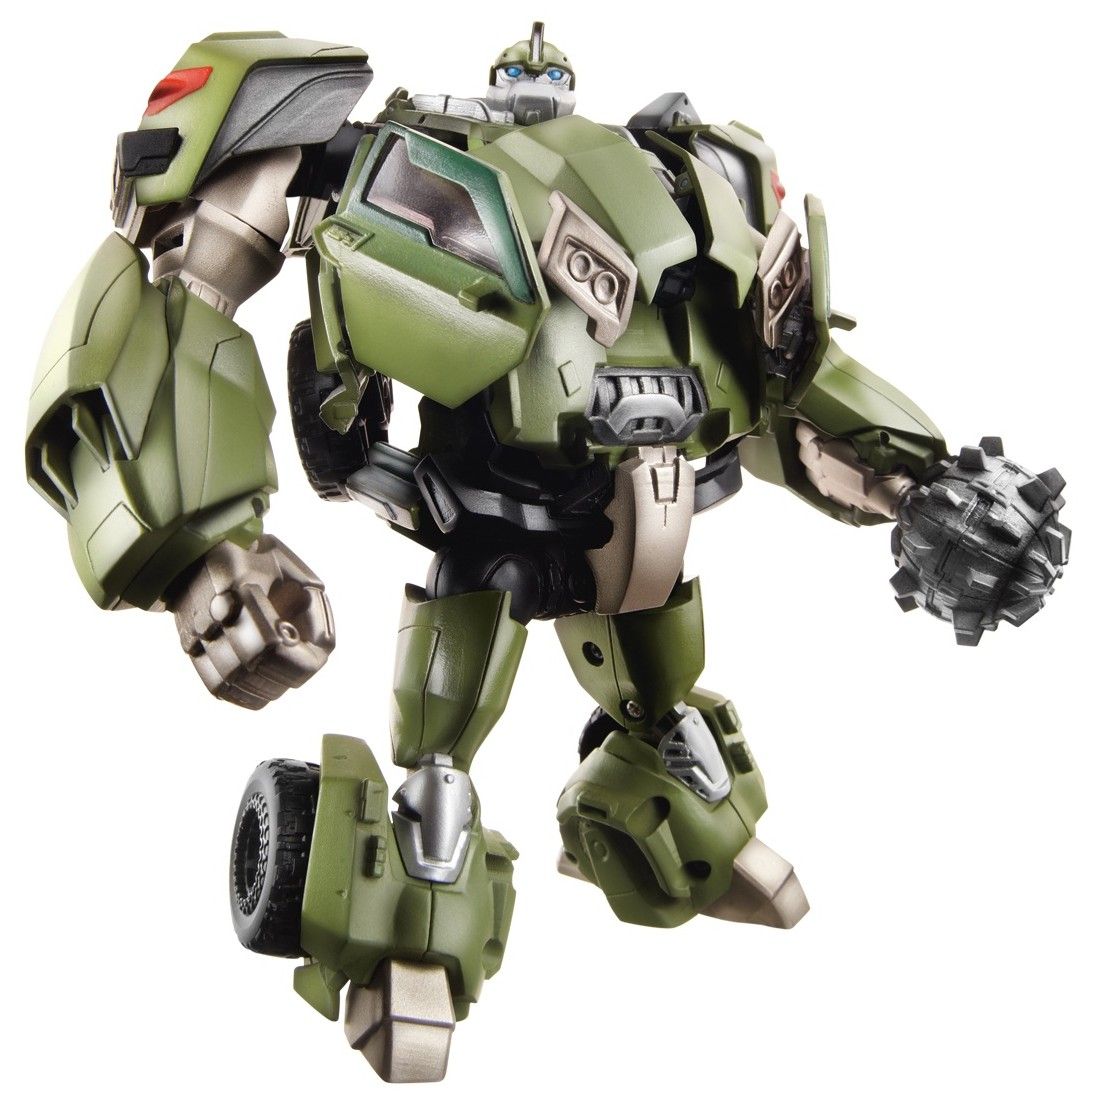 Bulkhead Prime Voyagers Wave 1 mode. This